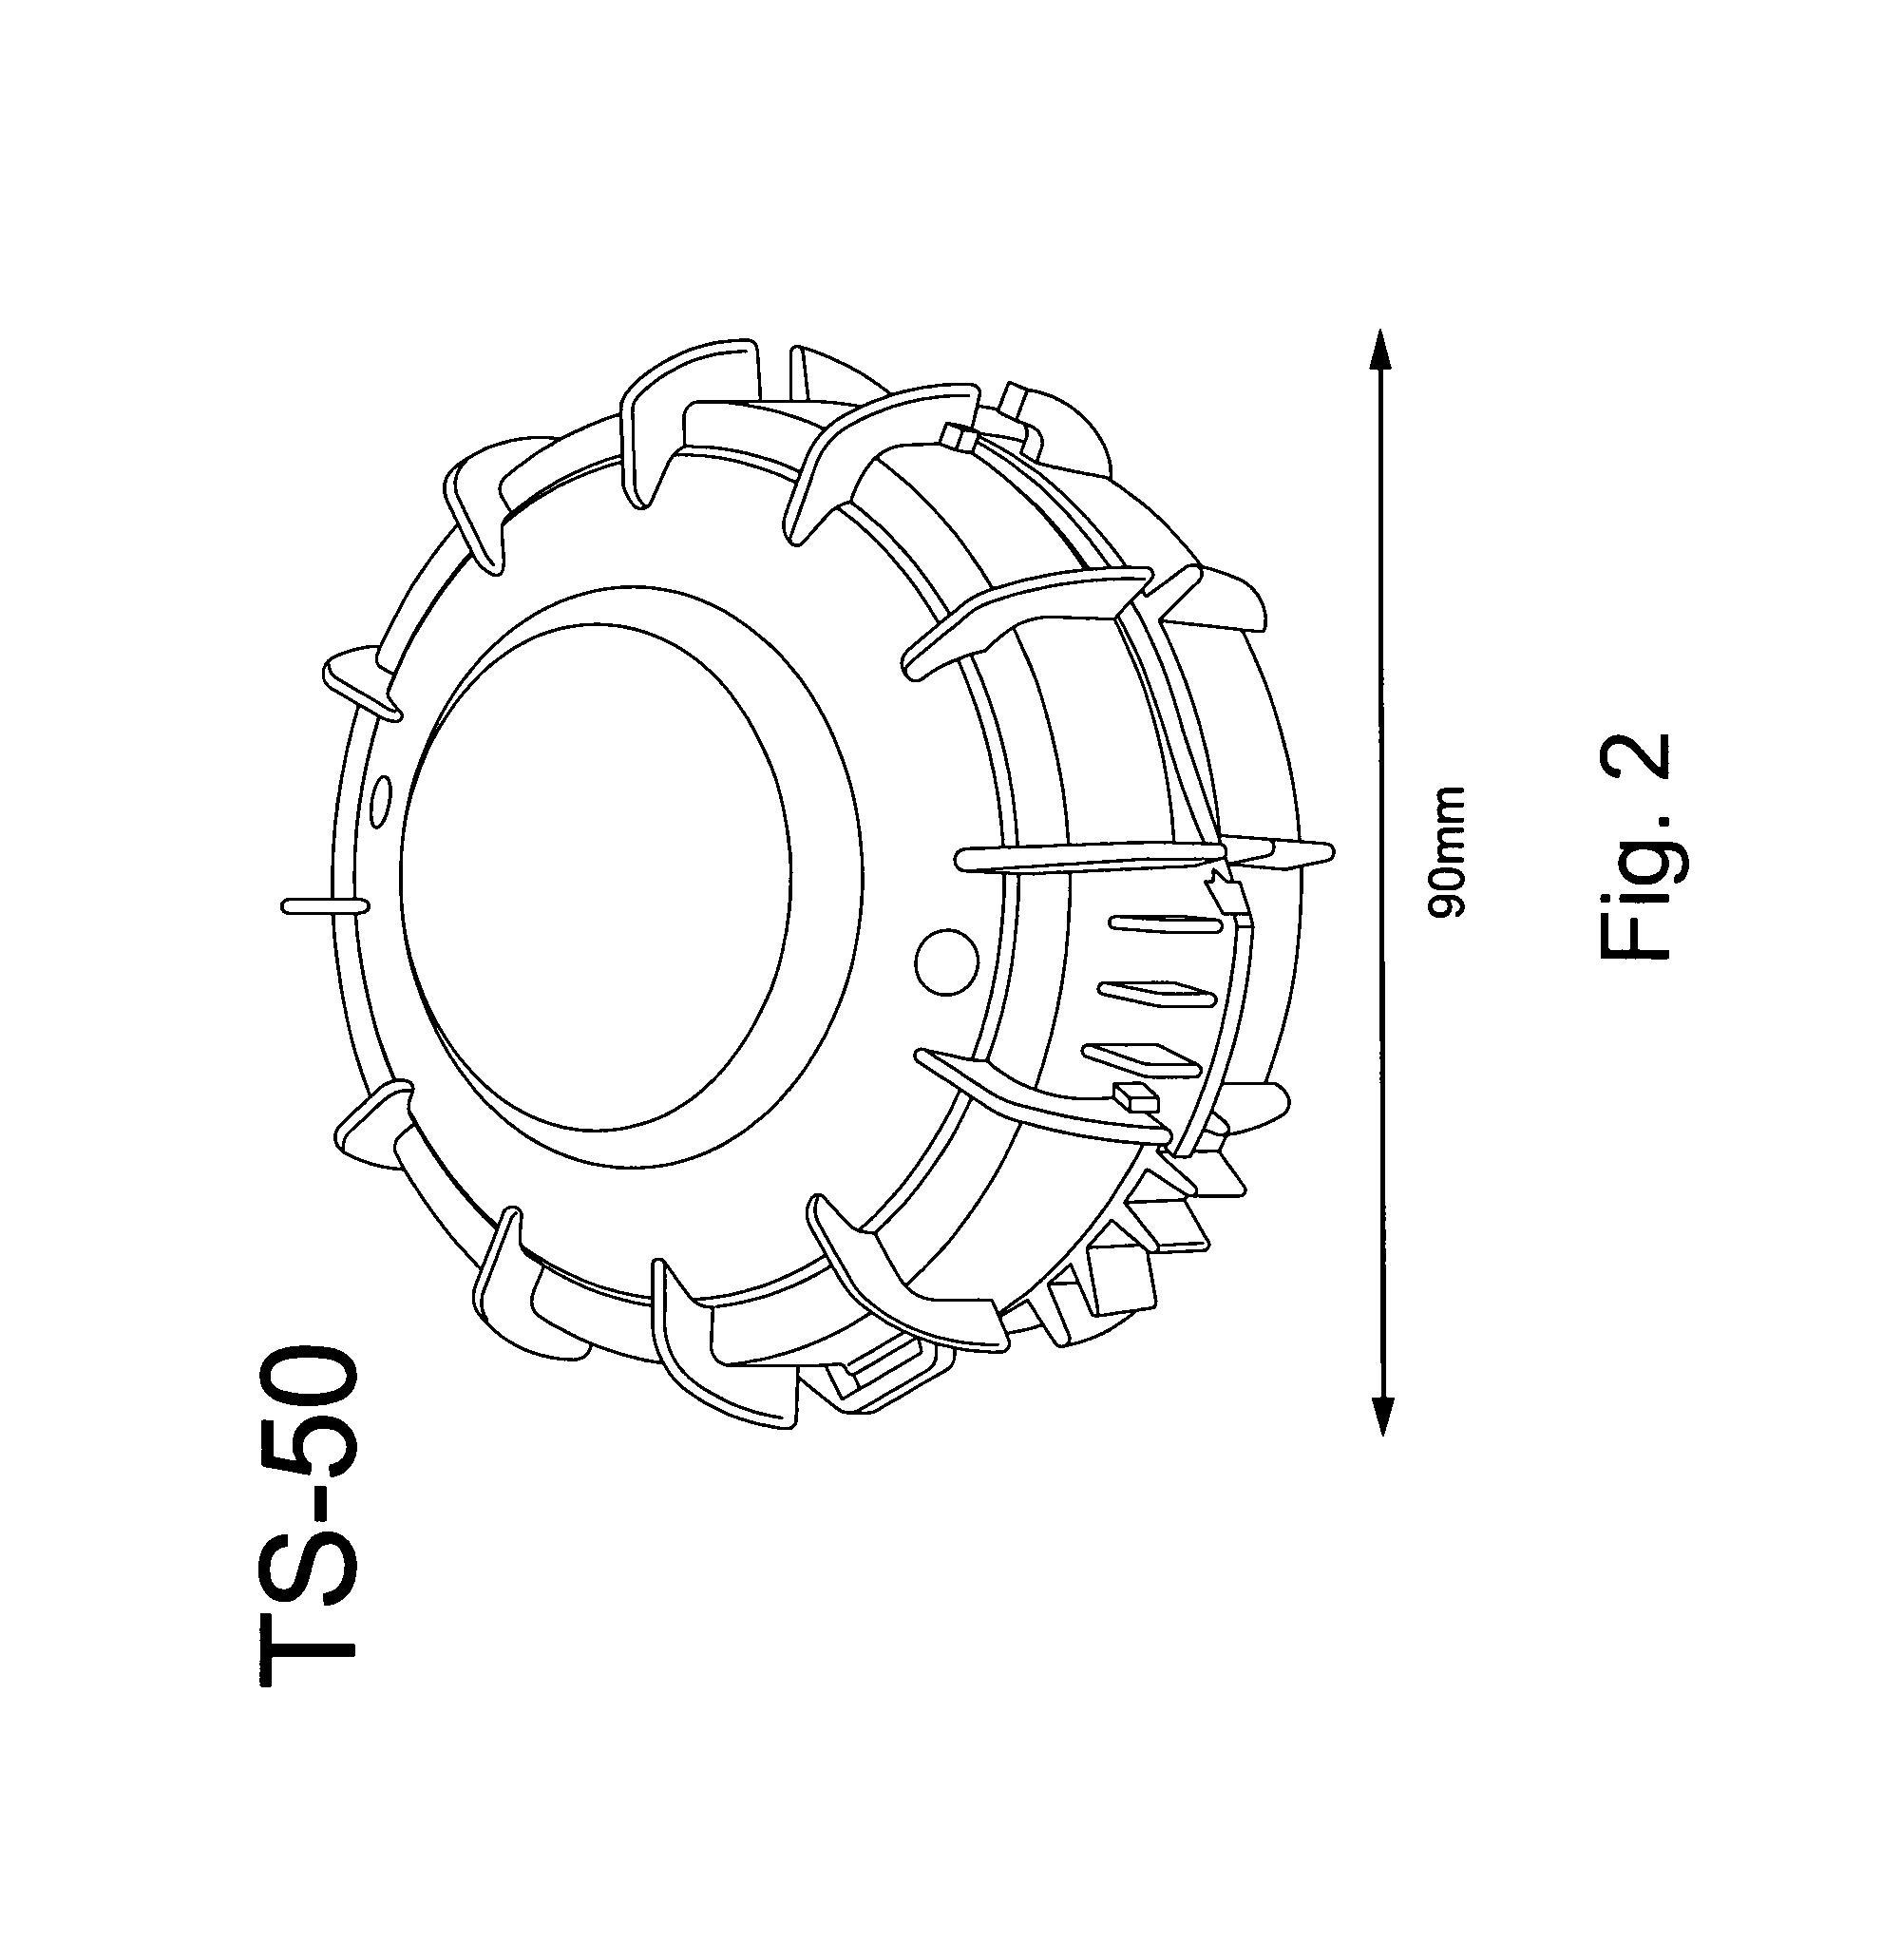 Vehicle-mounted ultra-wideband radar systems and methods